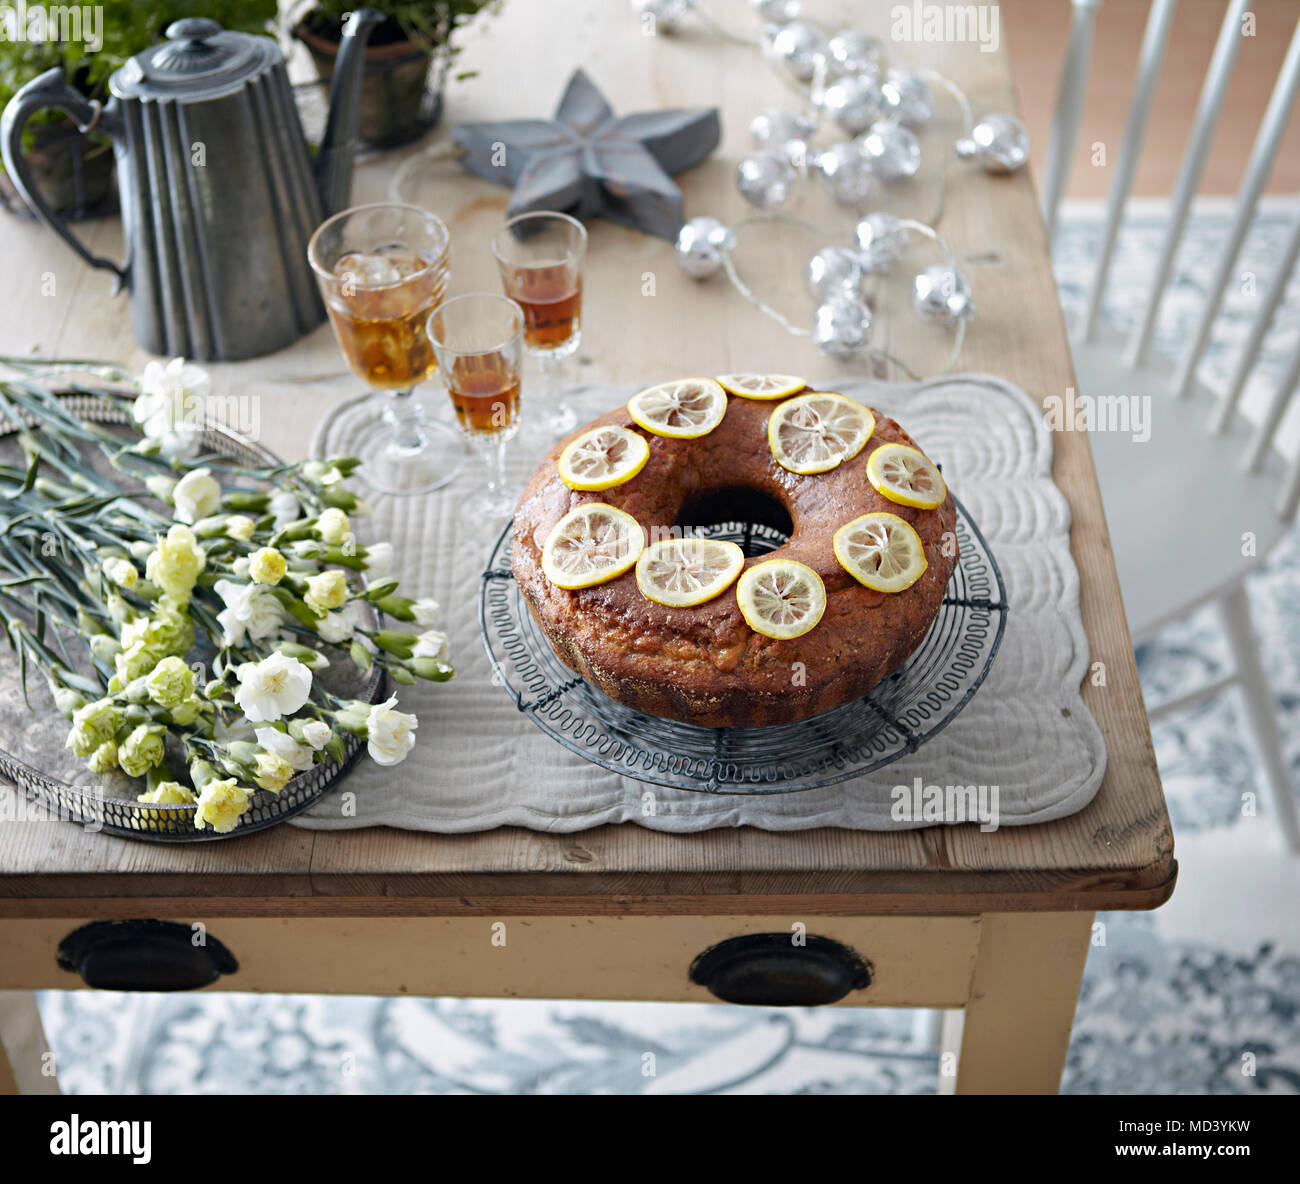 Table with bundt cake, flowers and drinks Stock Photo